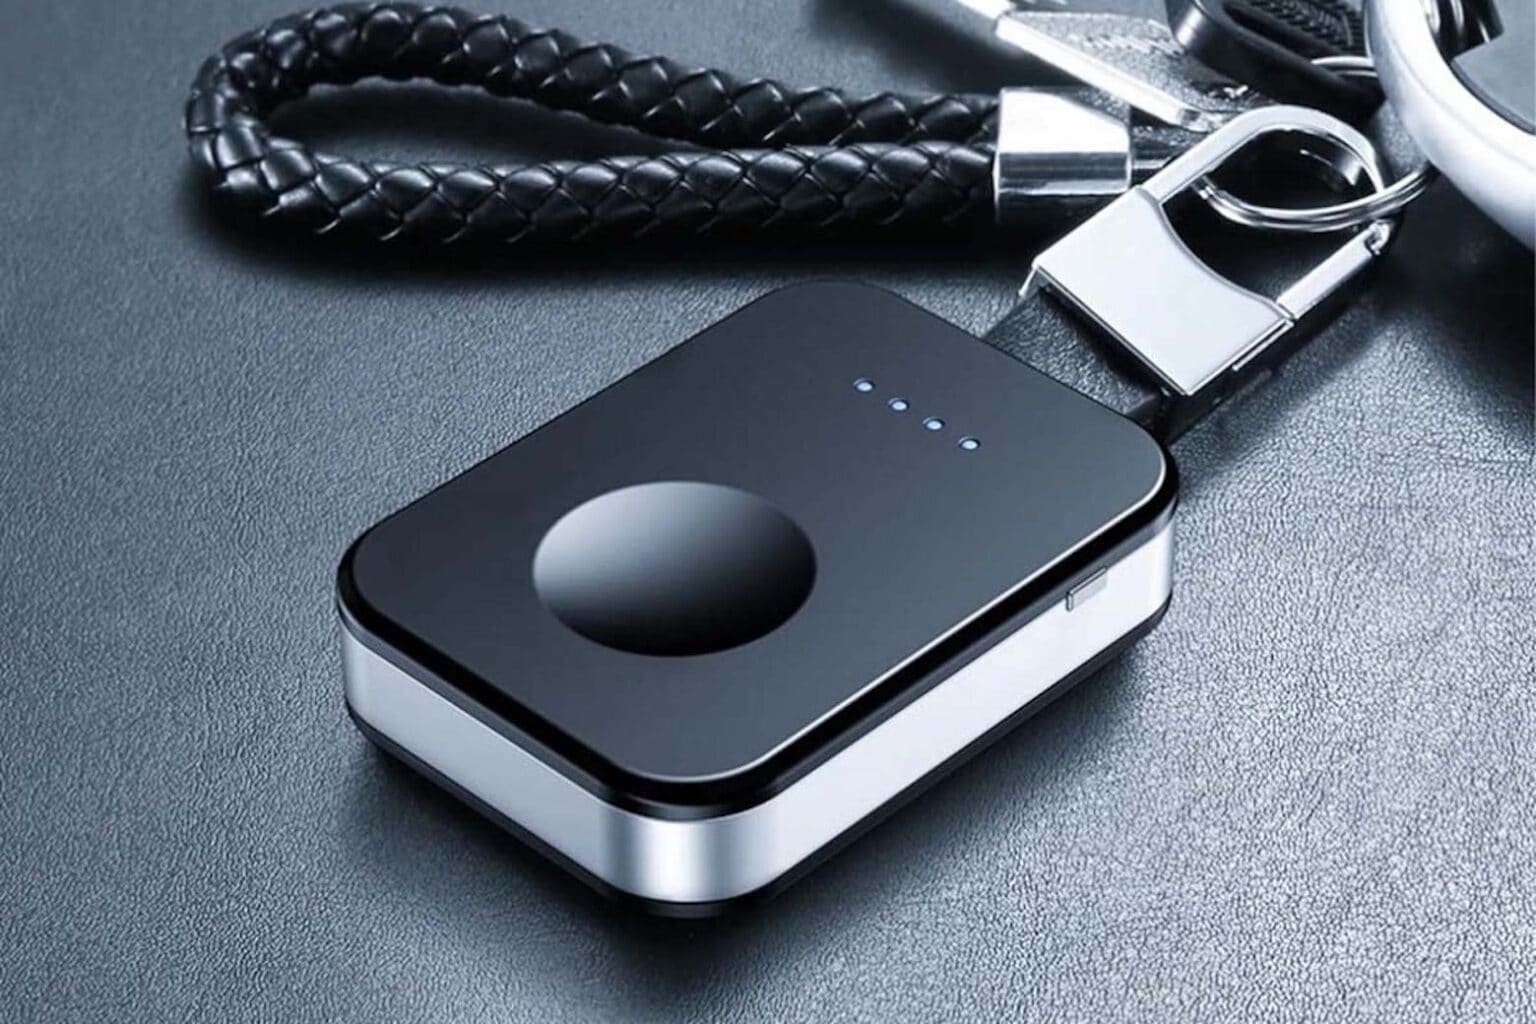 Pick up this versatile and Apple Watch wireless charger keychain for $30 off.